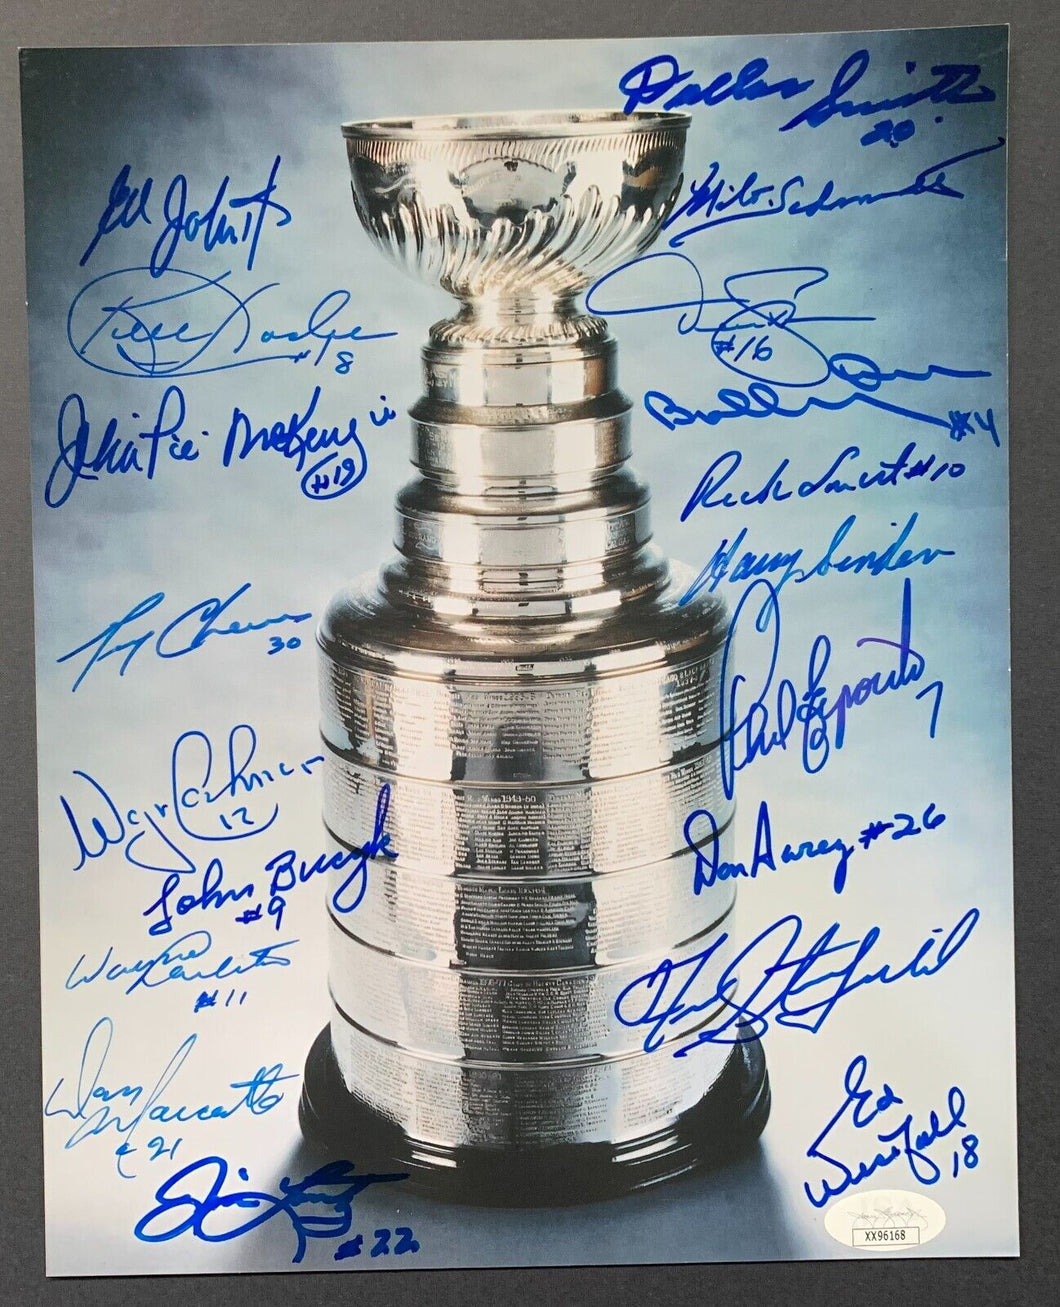 Autographed Boston Bruins 1969-70 Stanley Cup Champions Photo NHL Hockey Signed